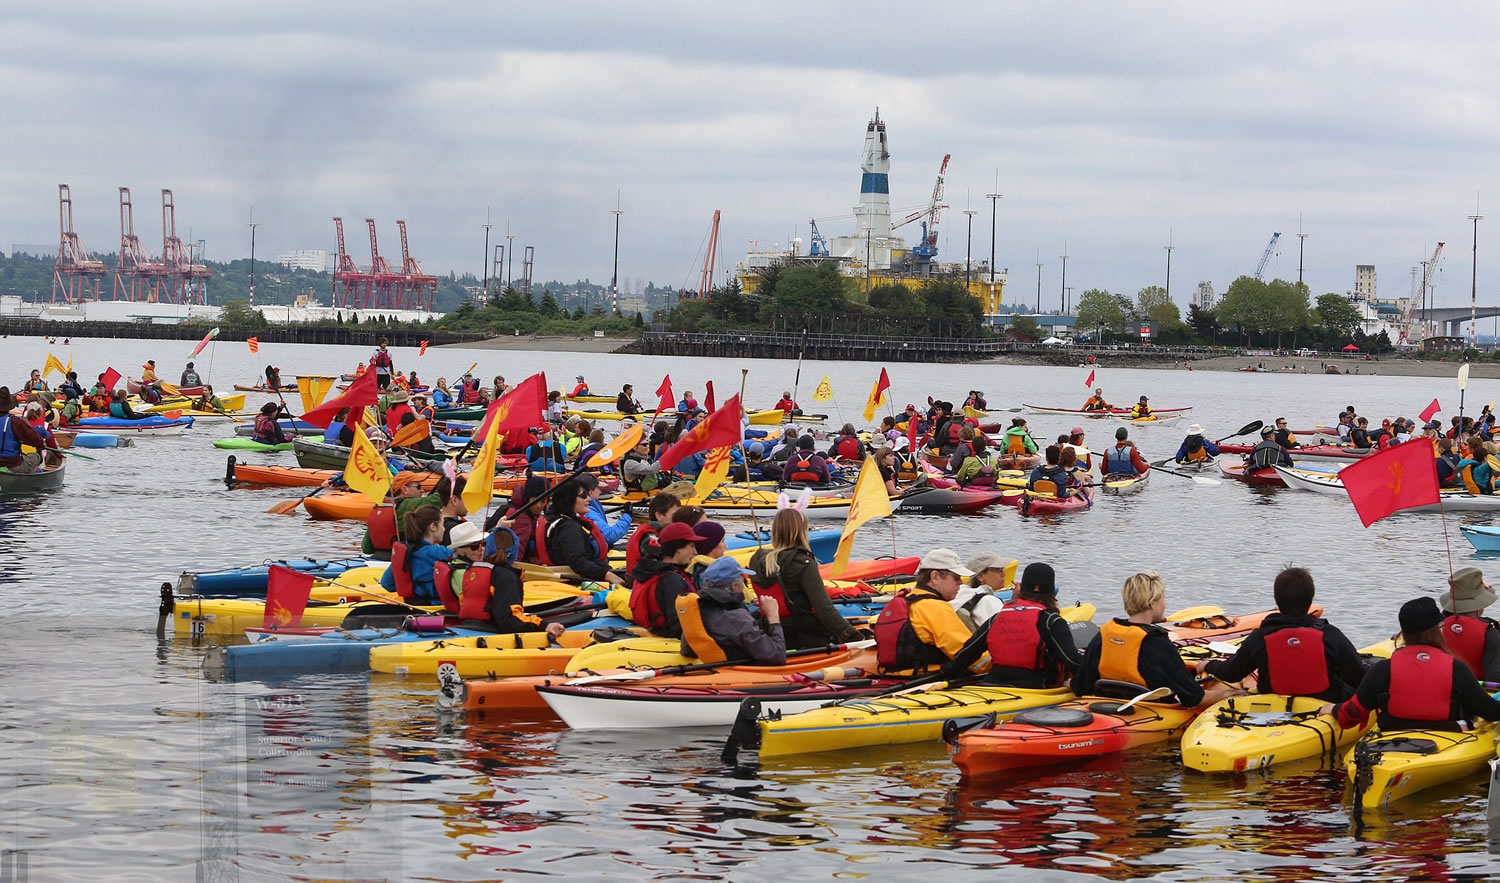 Activists in kayaks who oppose Royal Dutch Shell's plans to drill for oil in the Arctic Ocean, prepare to paddle to Shell's Polar Pioneer drilling rig docked in Elliott Bay, during the &quot;Paddle in Seattle&quot; protest on Saturday in Seattle.